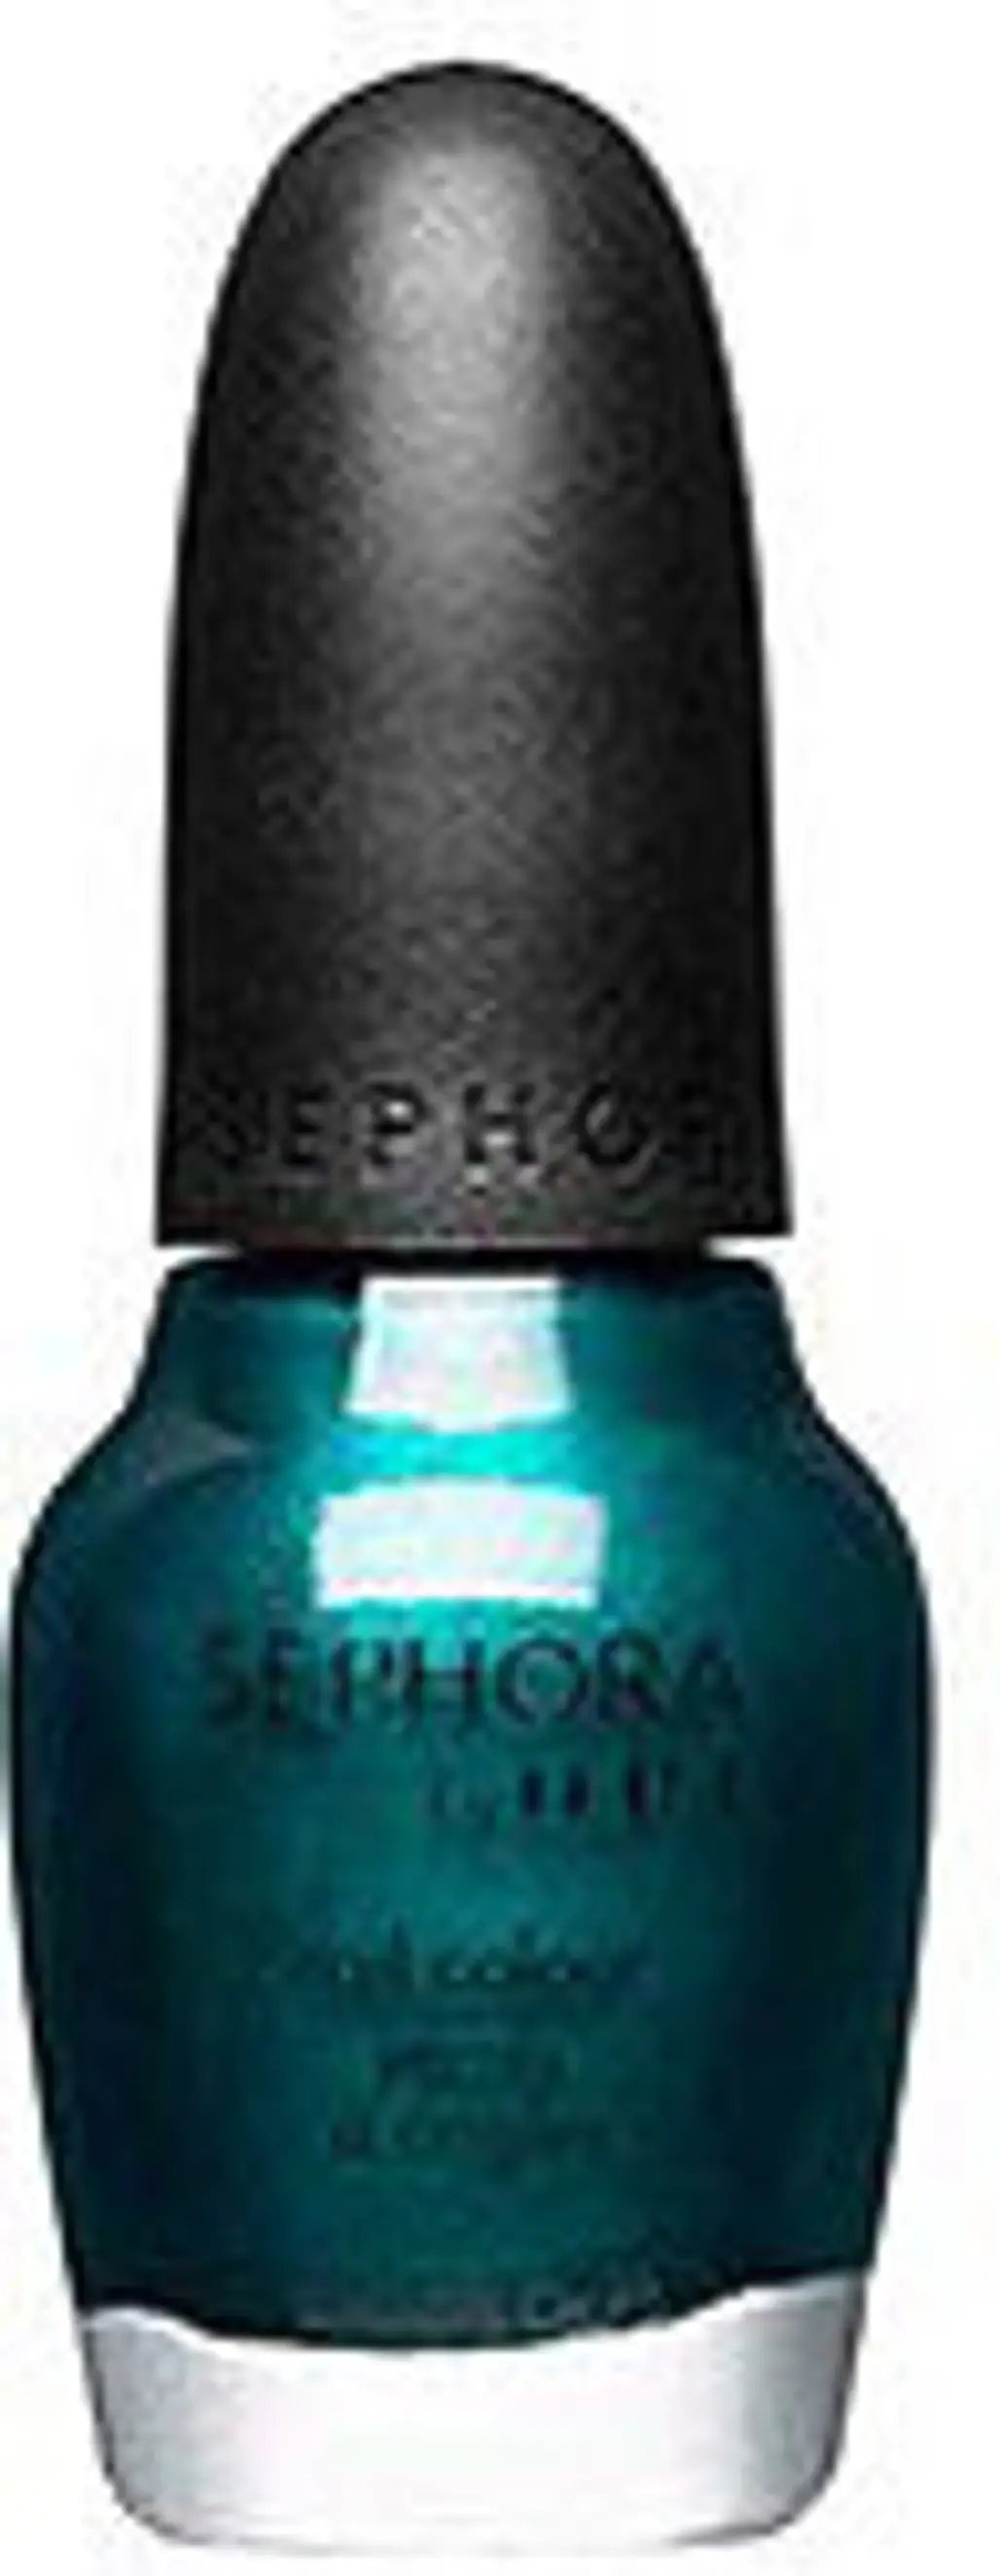 Sephora by OPI ‘Teal We Meet Again’ Nail Colour